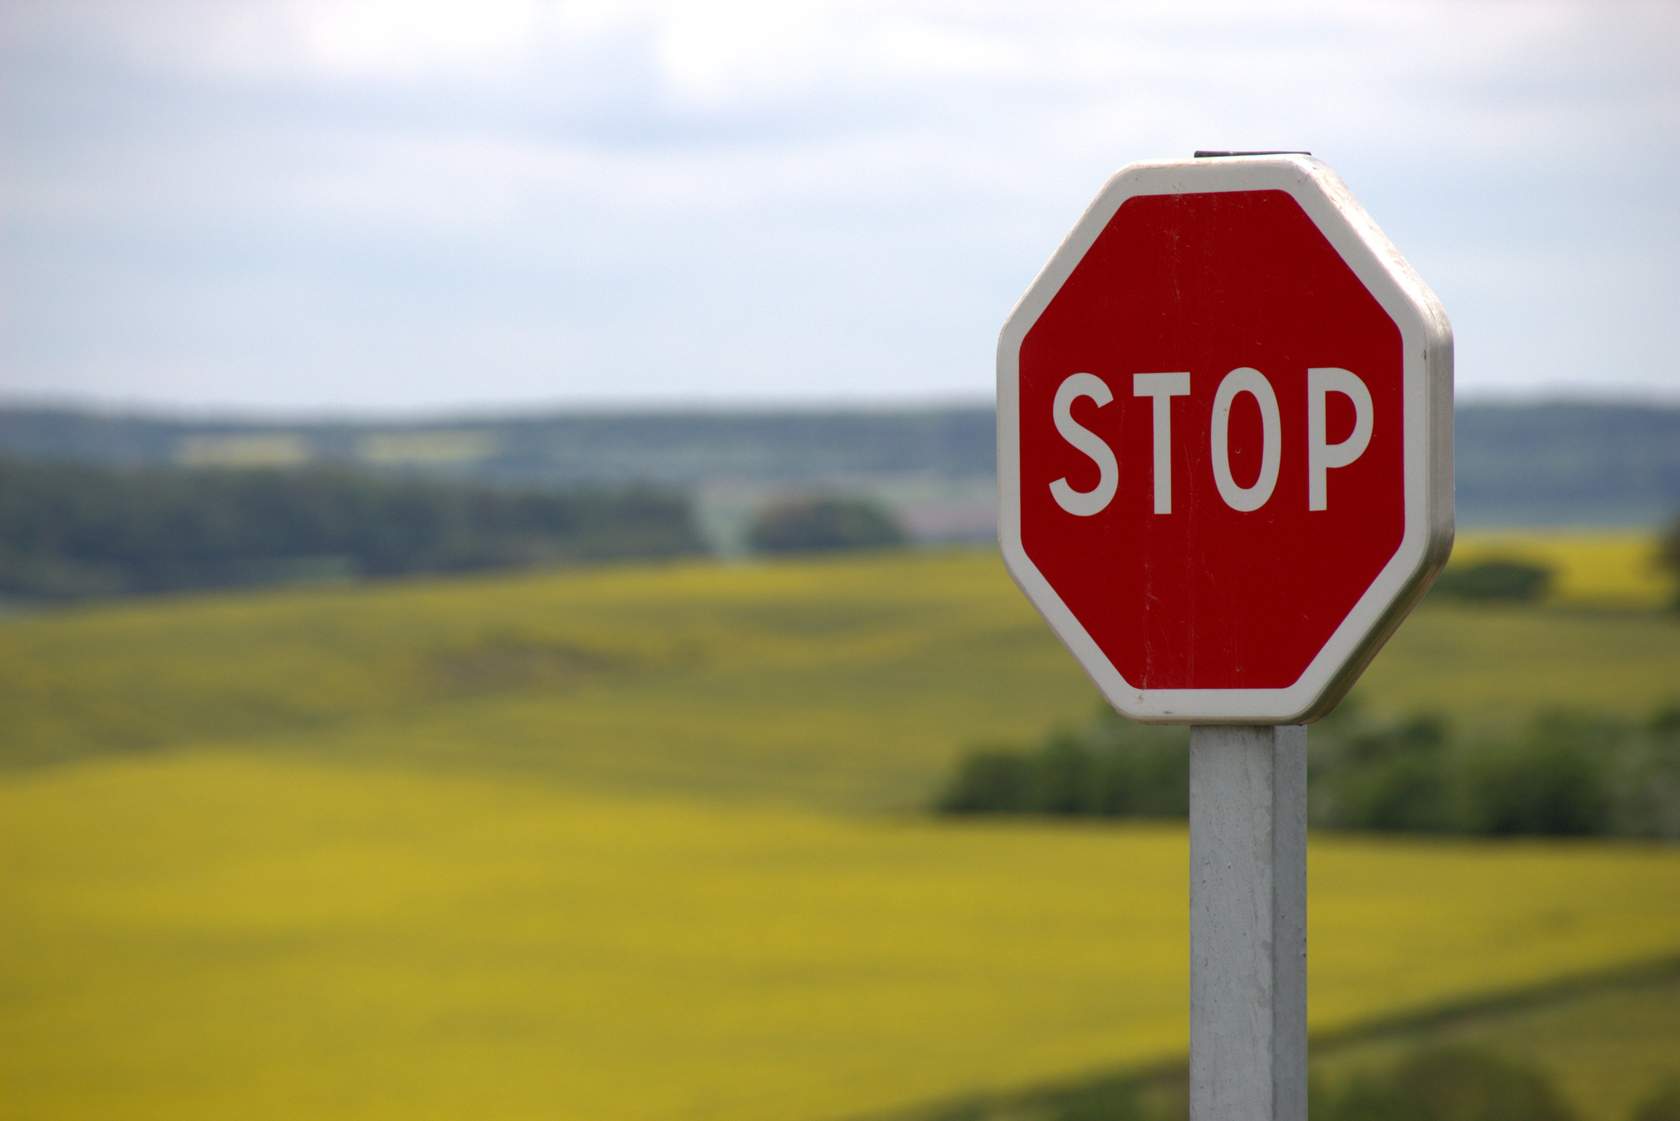 A stimulus in the field with a stop sign.